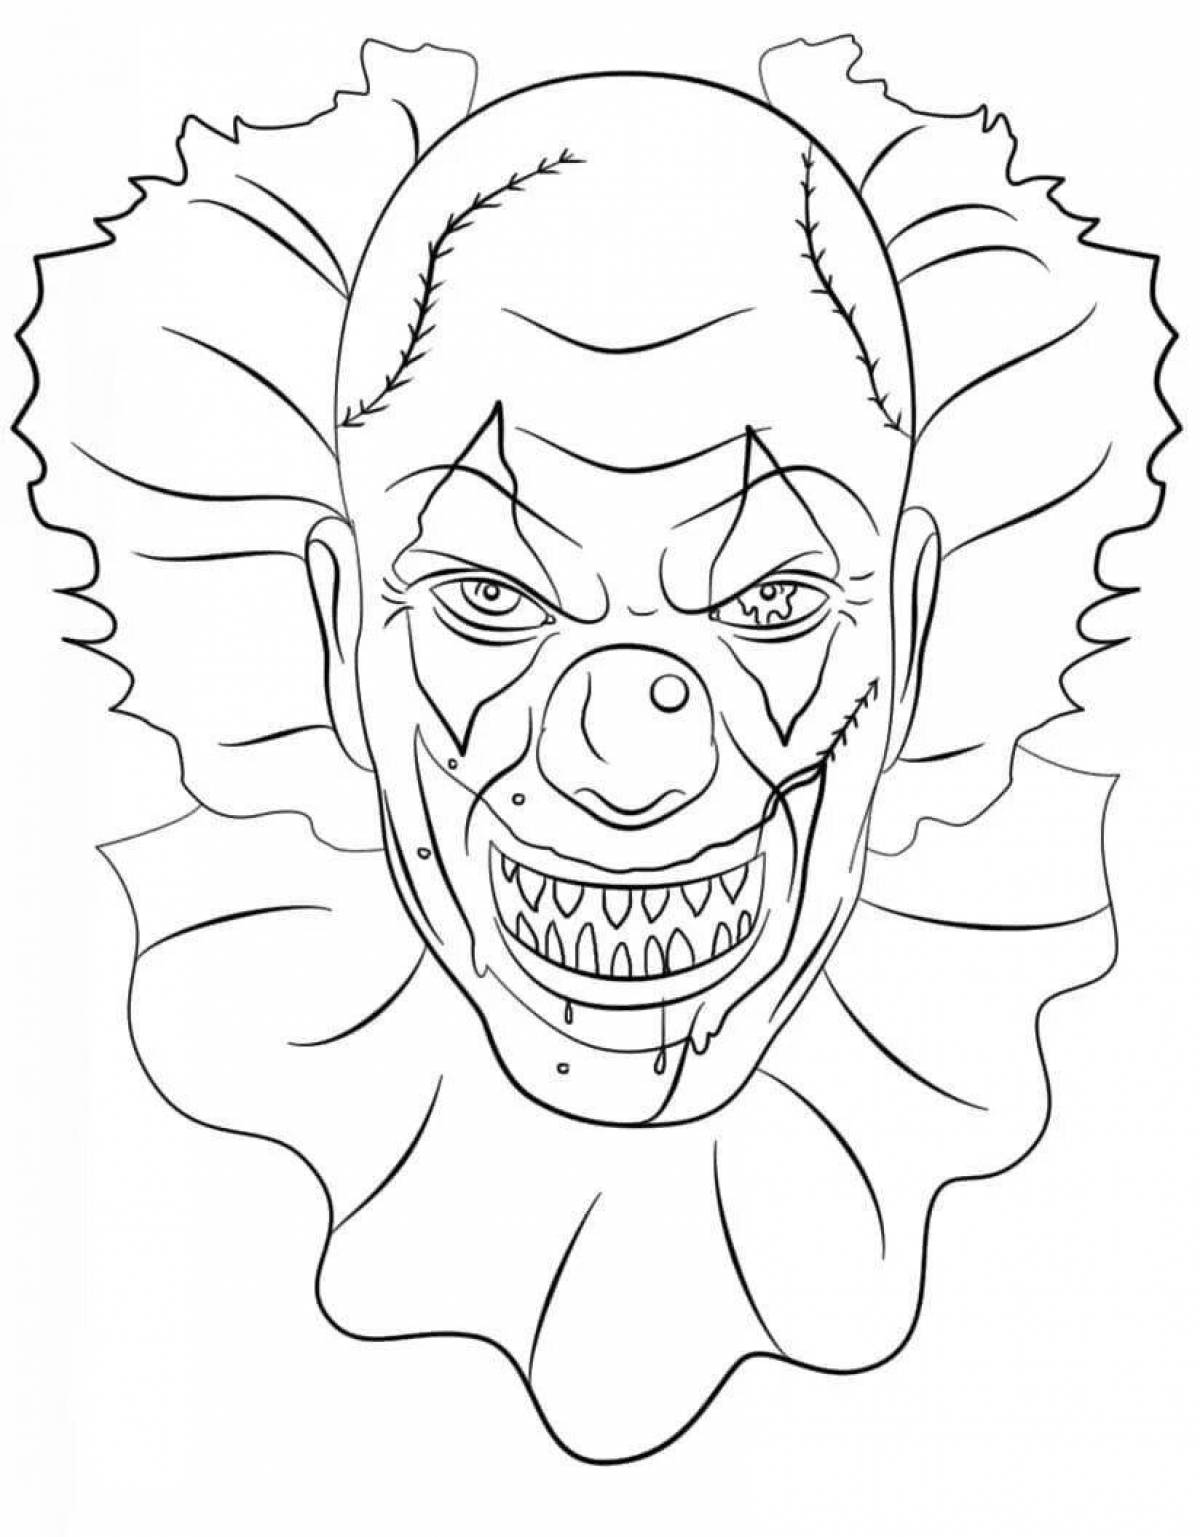 Pennywise grotesque coloring book